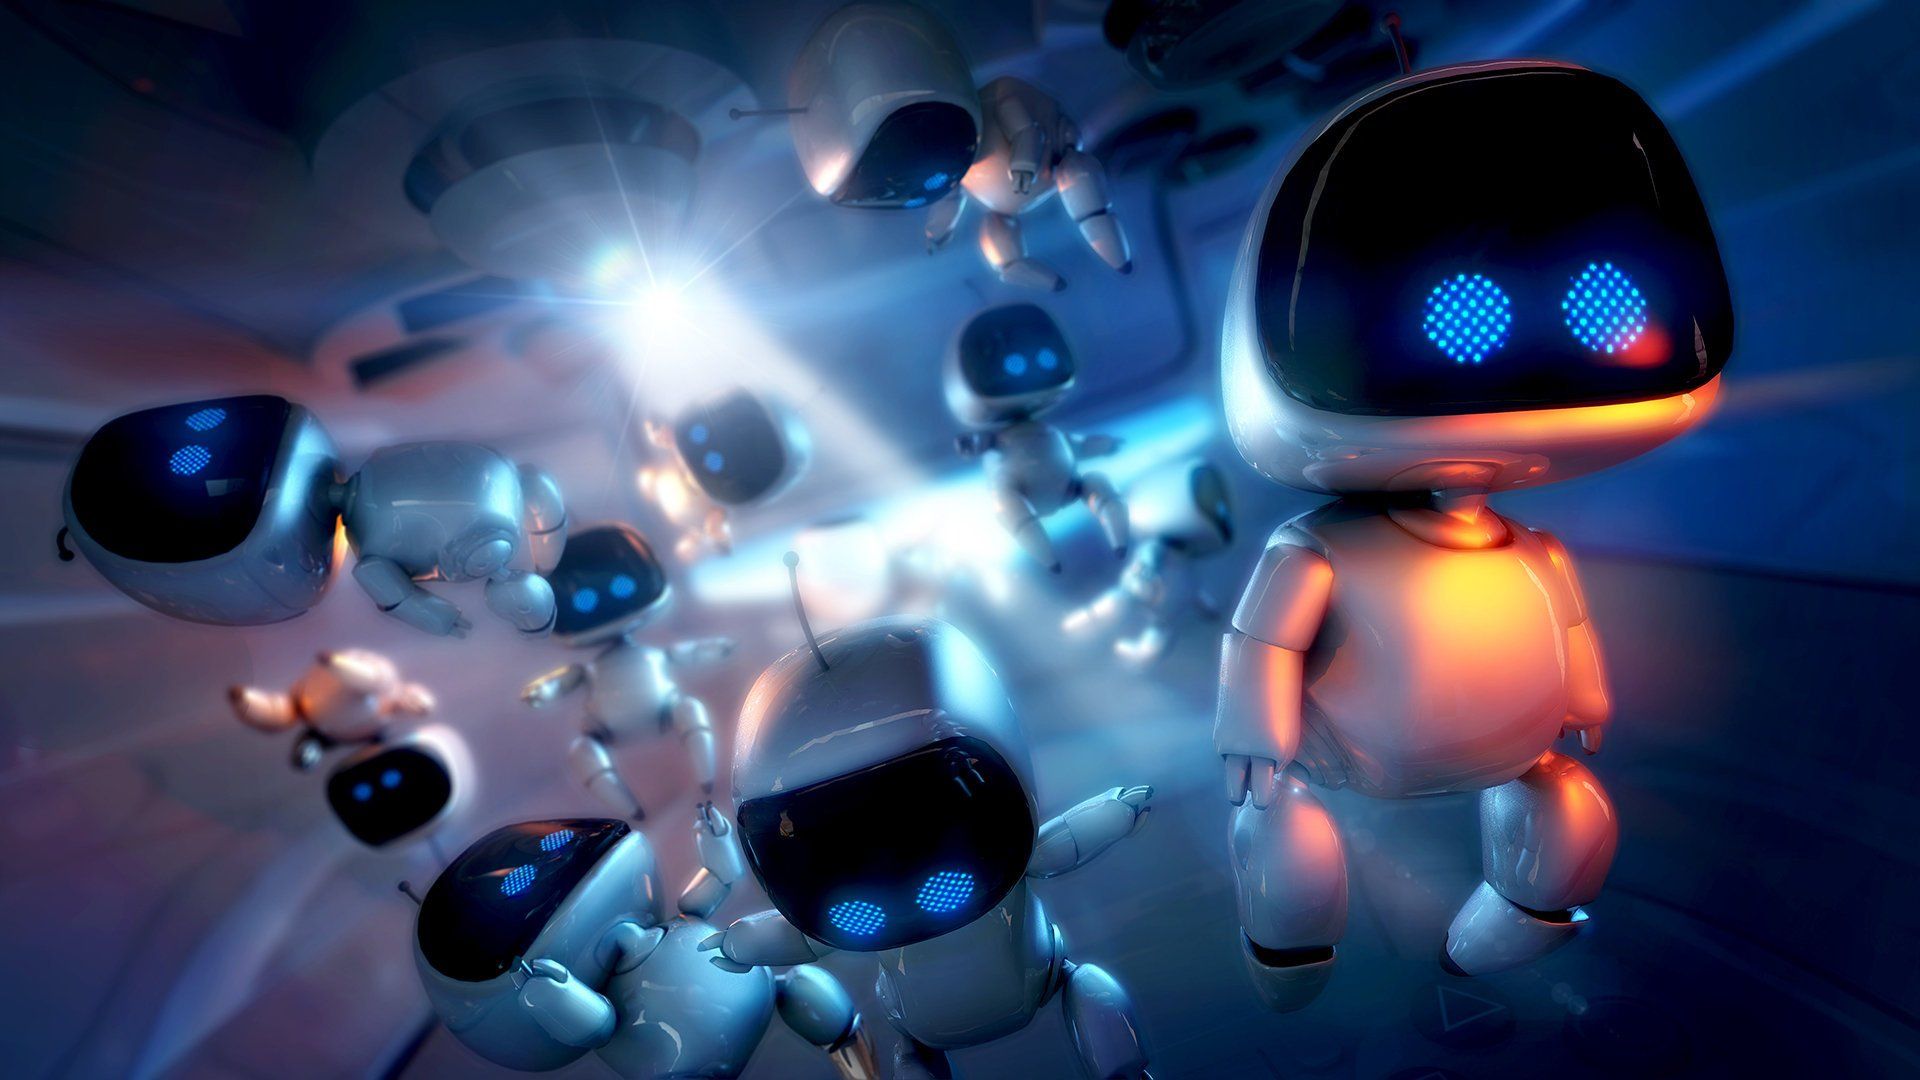 Astro Bot Dev Team Is Working on PS5 Demos These Become The Playroom 2?